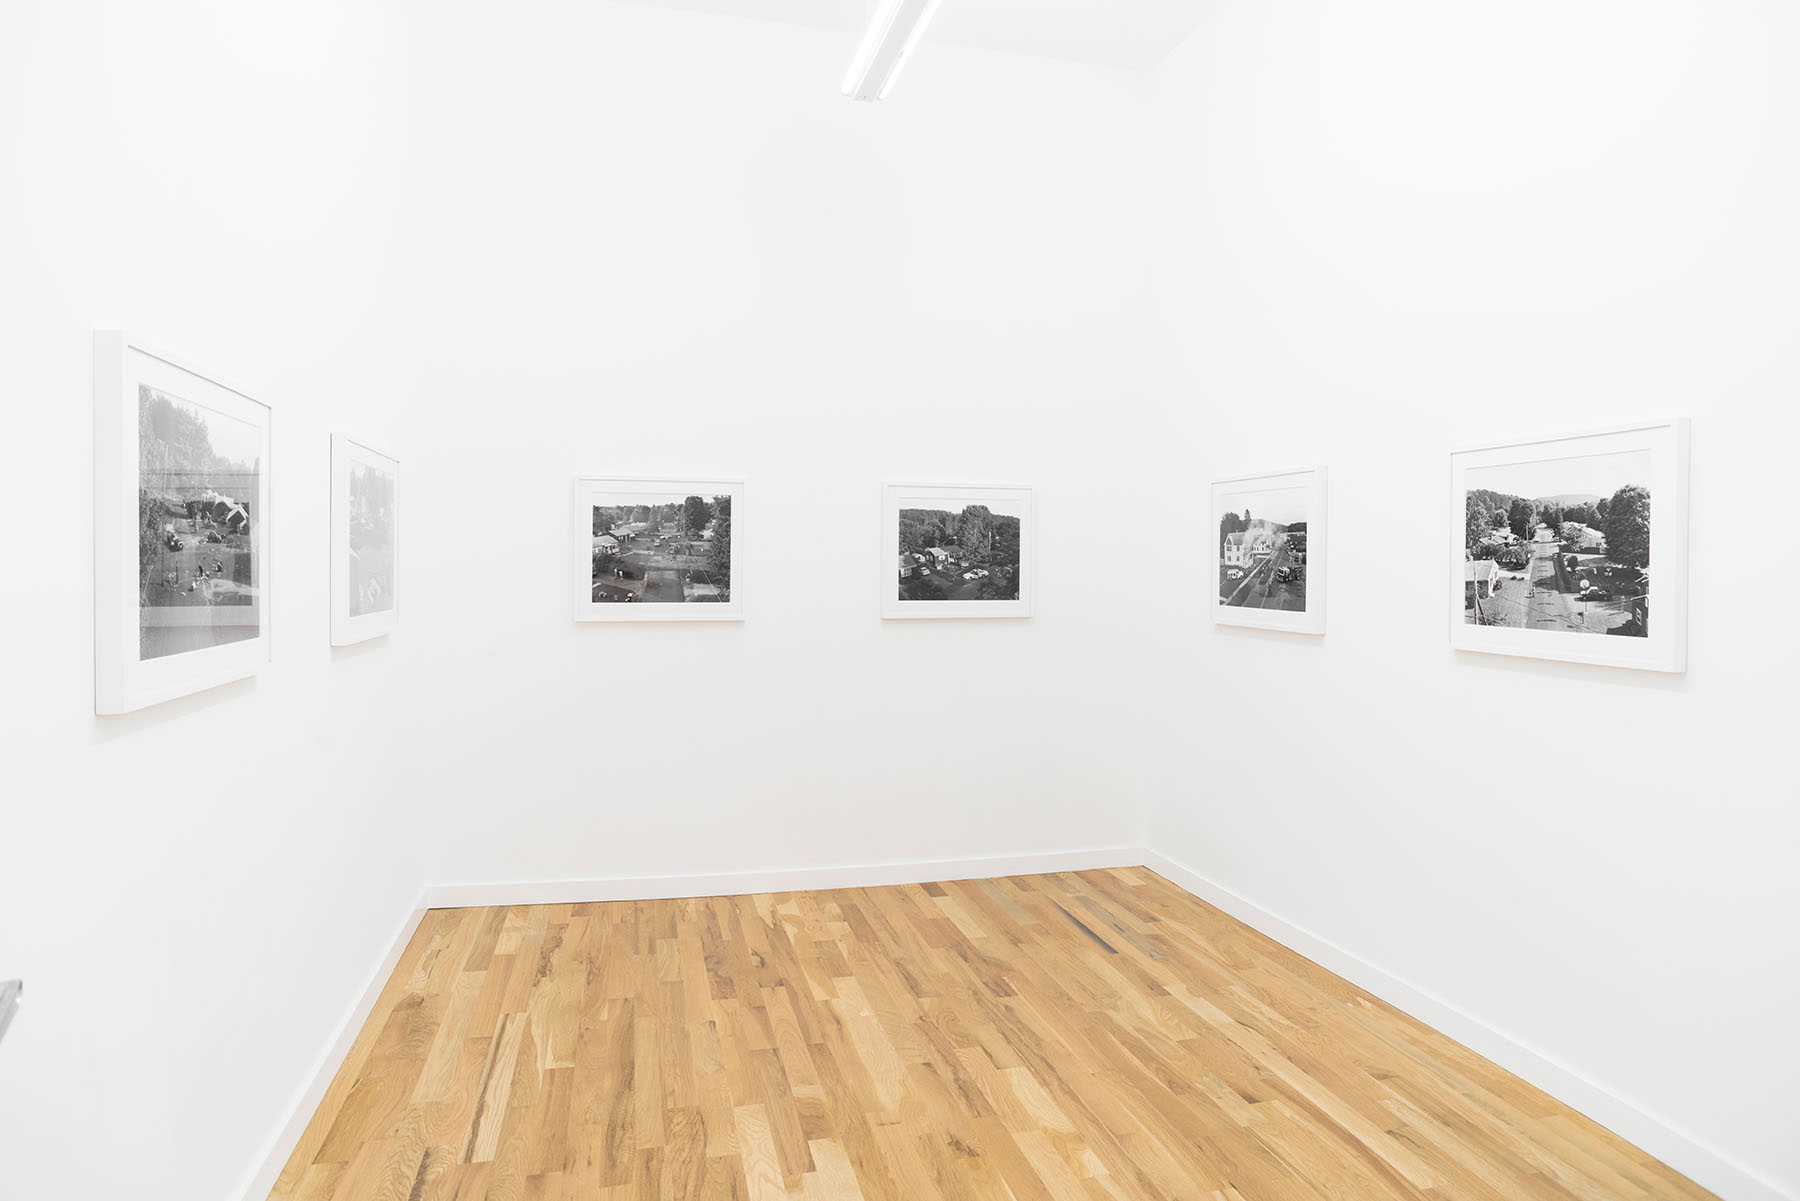 Installation view at DOCUMENT